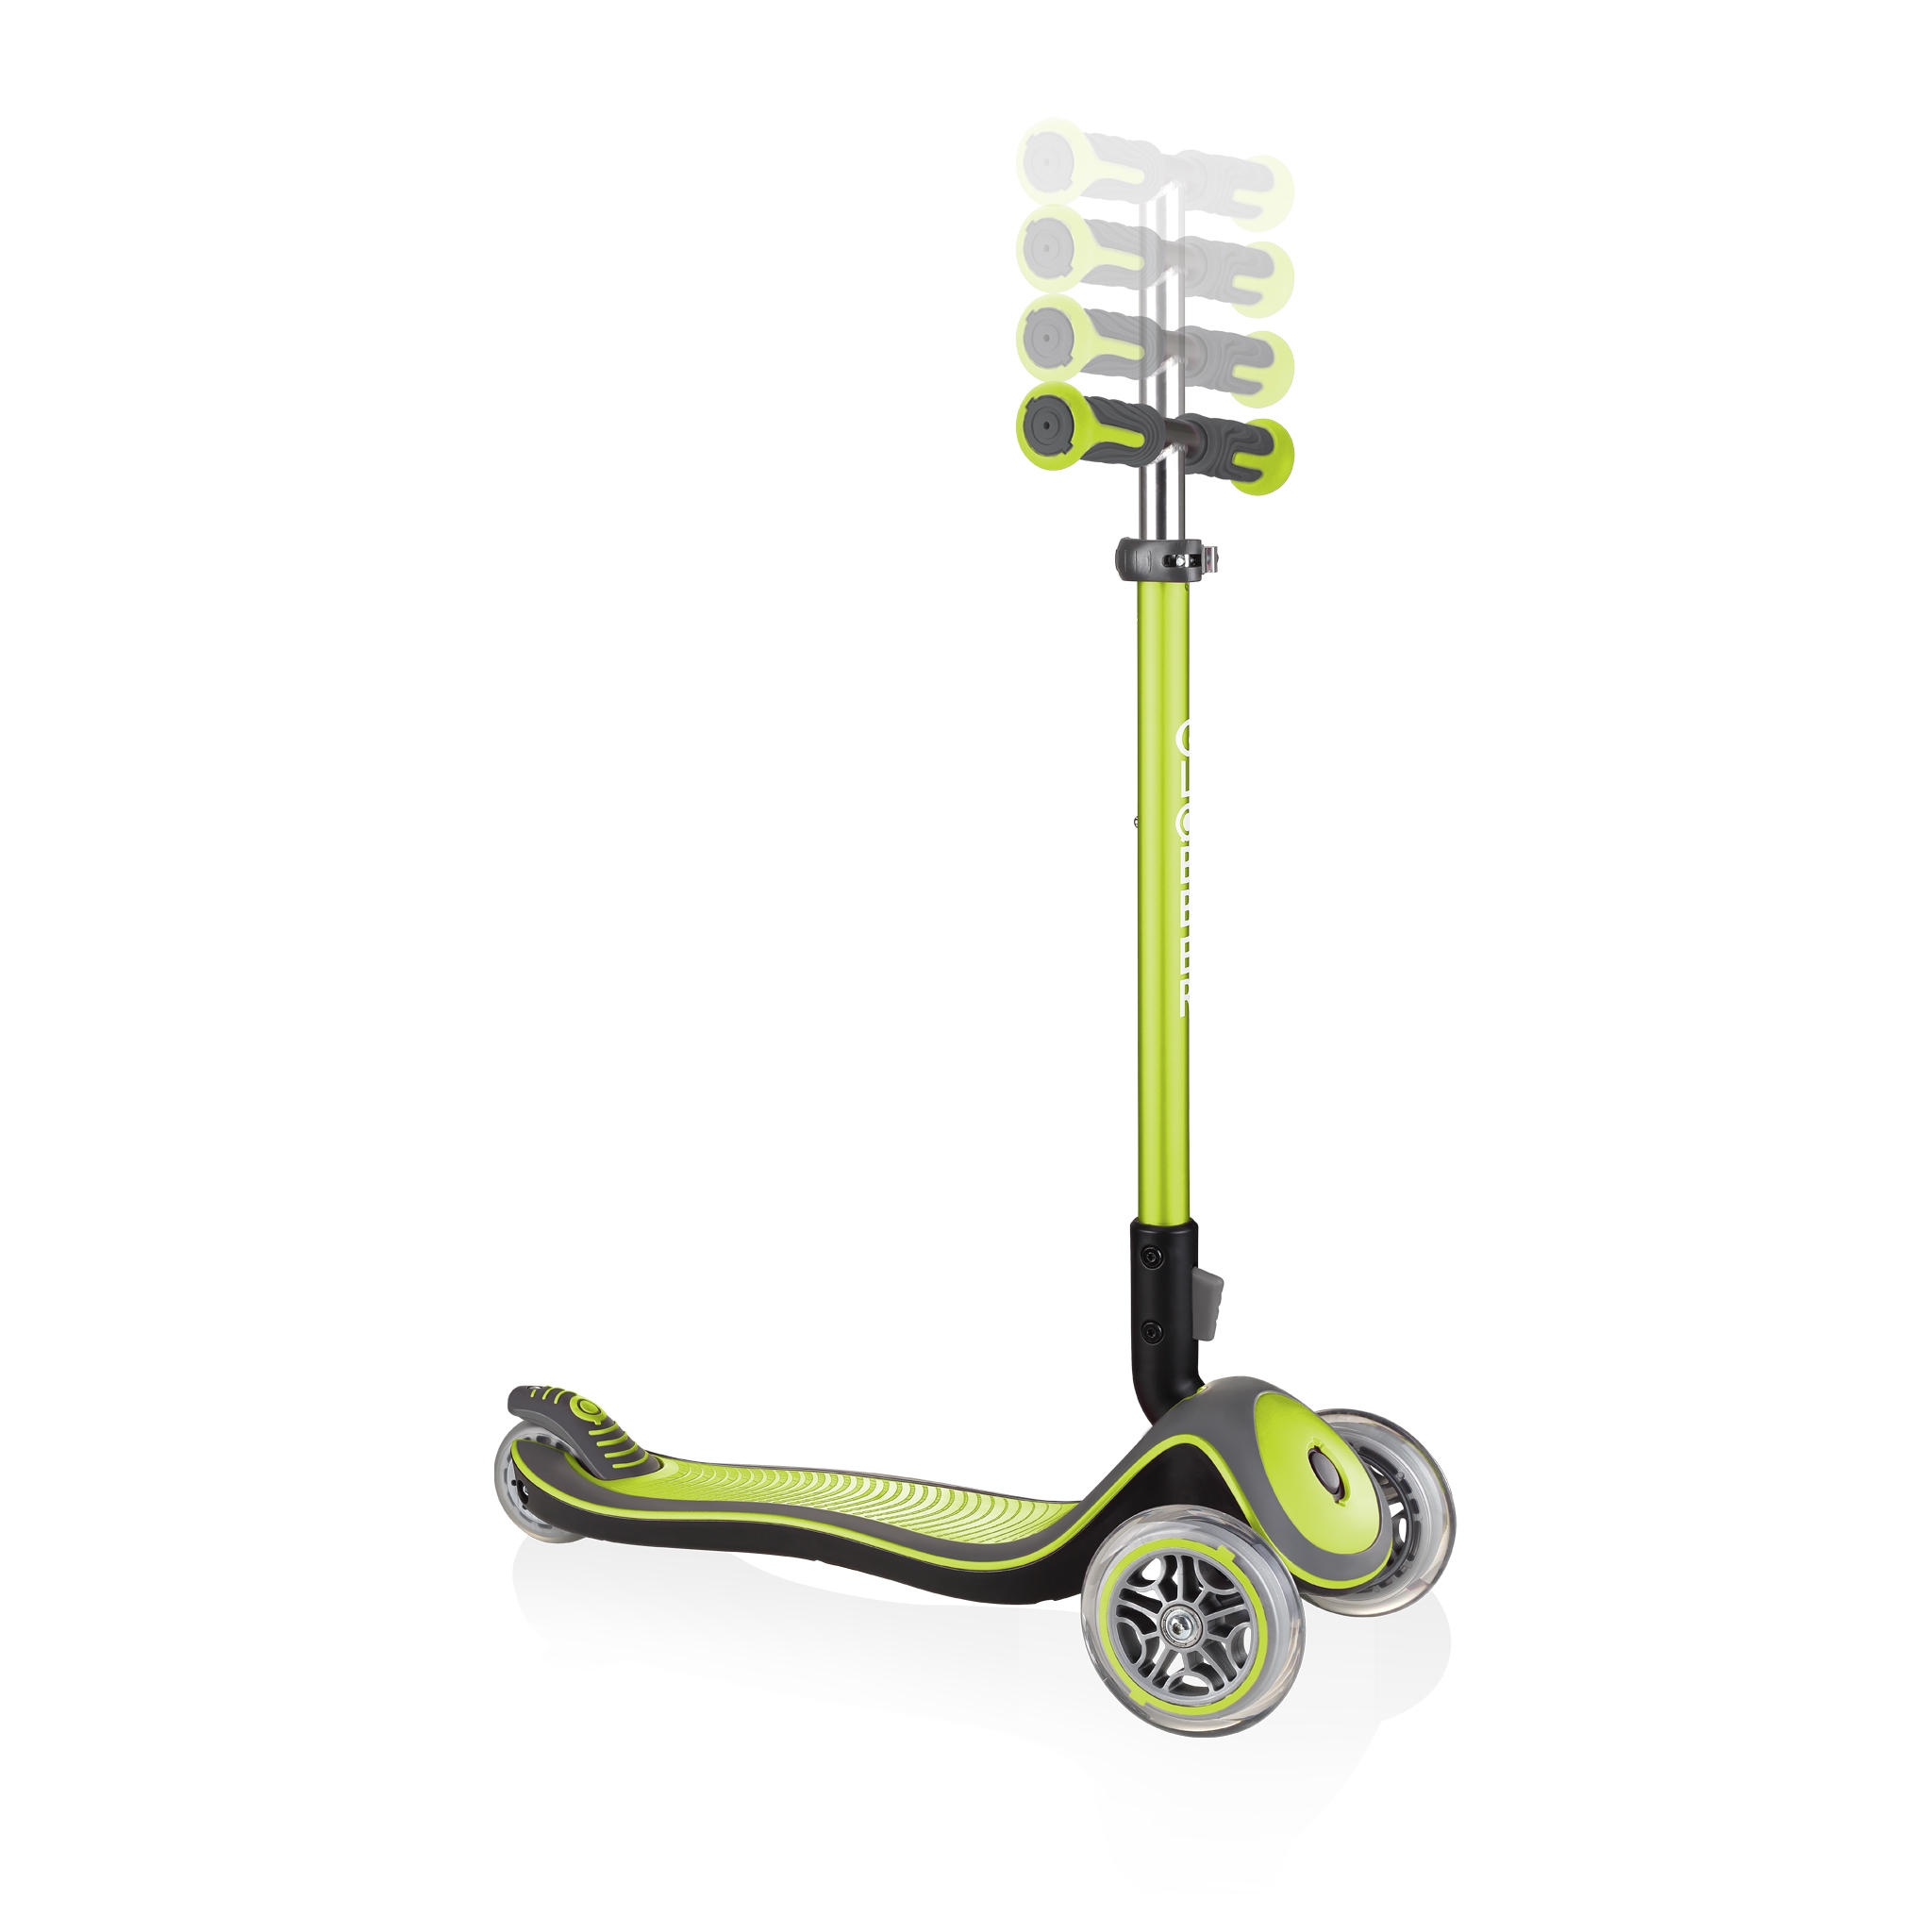 Globber-ELITE-DELUXE-3-wheel-adjustable-scooter-for-kids-with-anodized-T-bar-lime-green 1